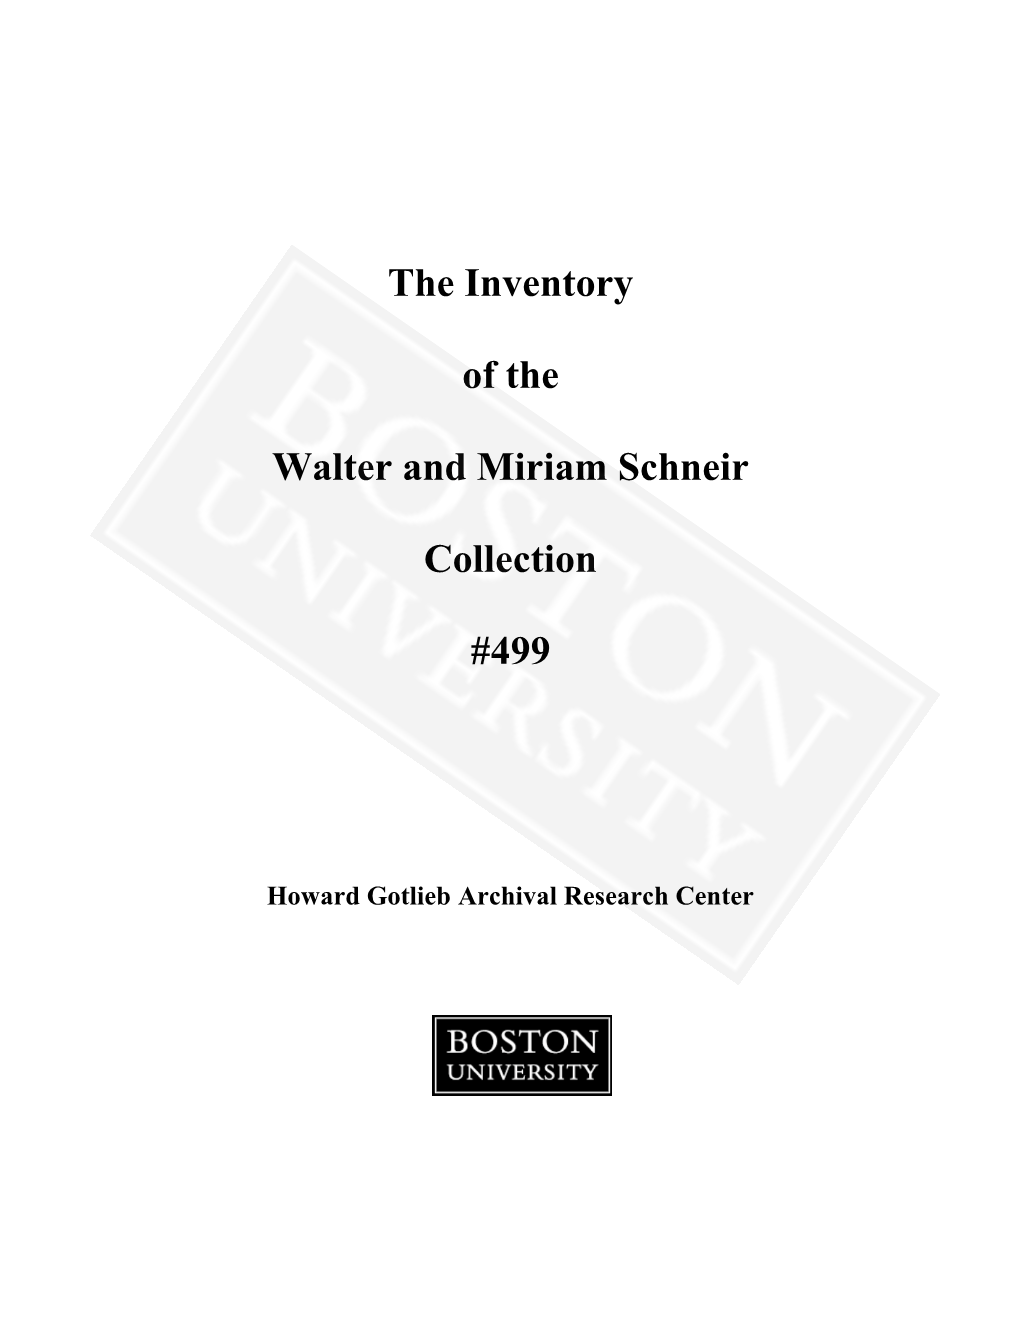 The Inventory of the Walter and Miriam Schneir Collection #499